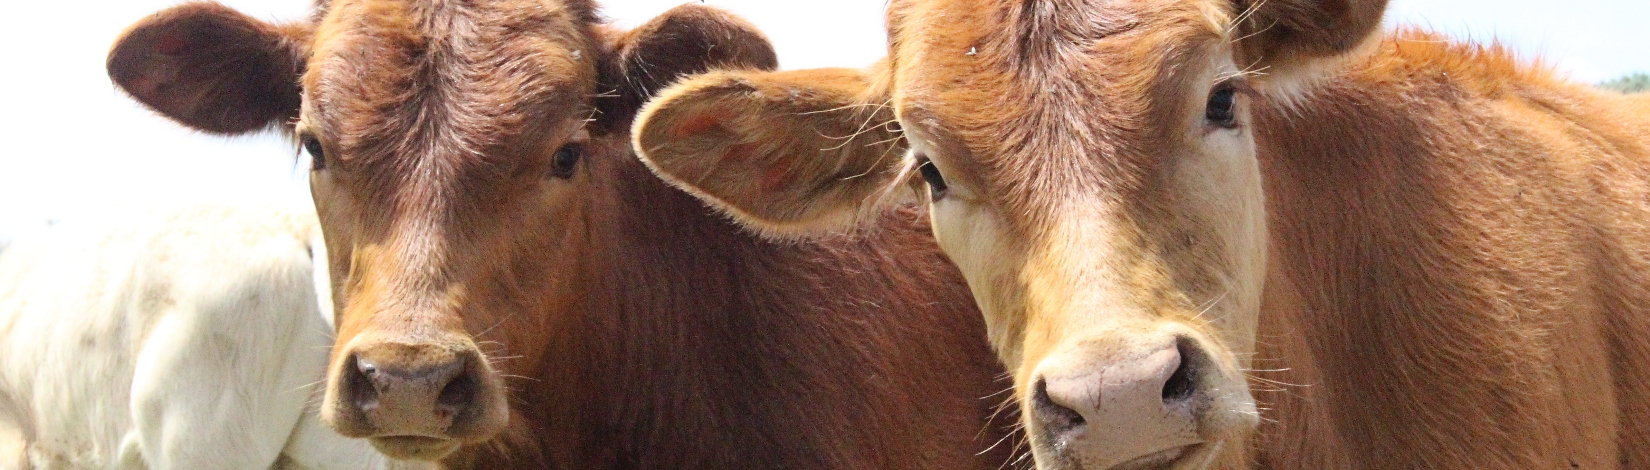 Two curious brown cows in a field.     